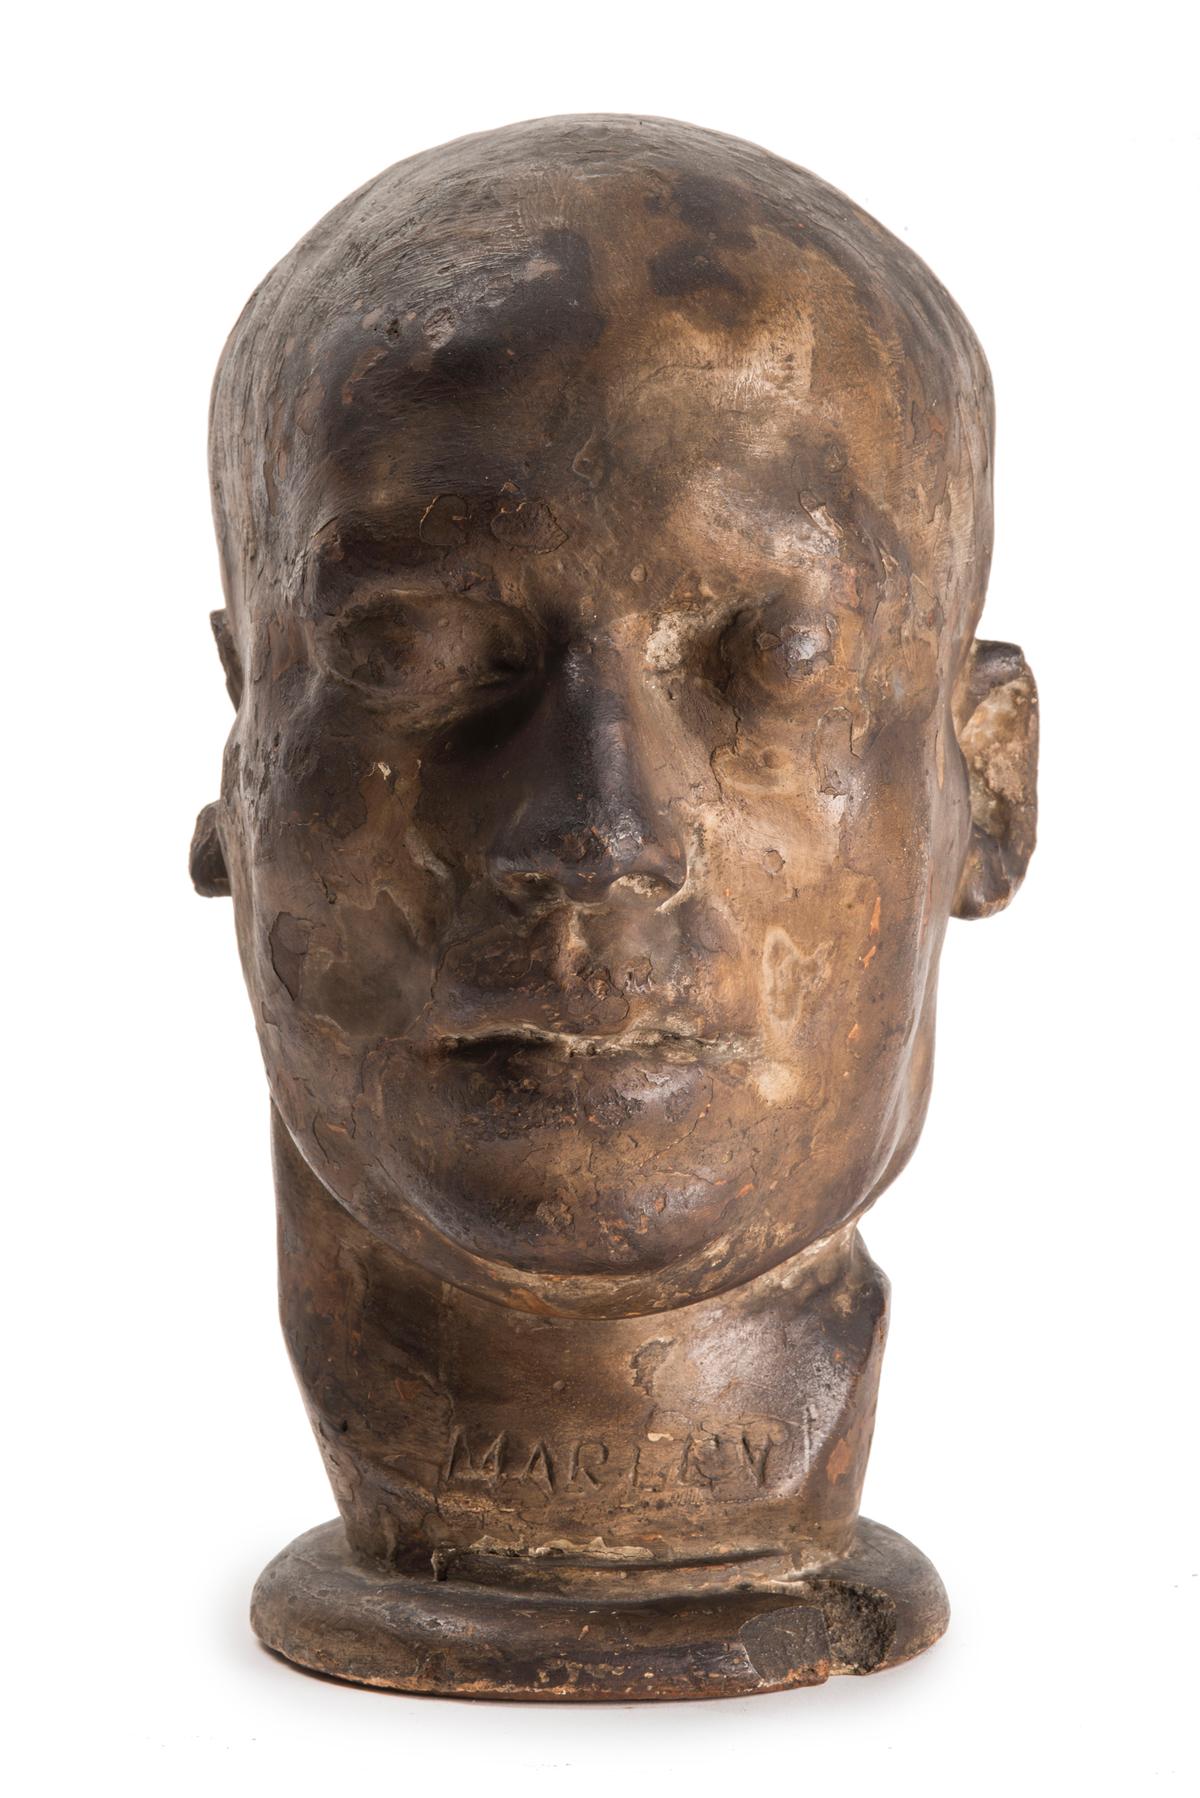 The Death Mask of Robert Marley 1856 / Museum of London